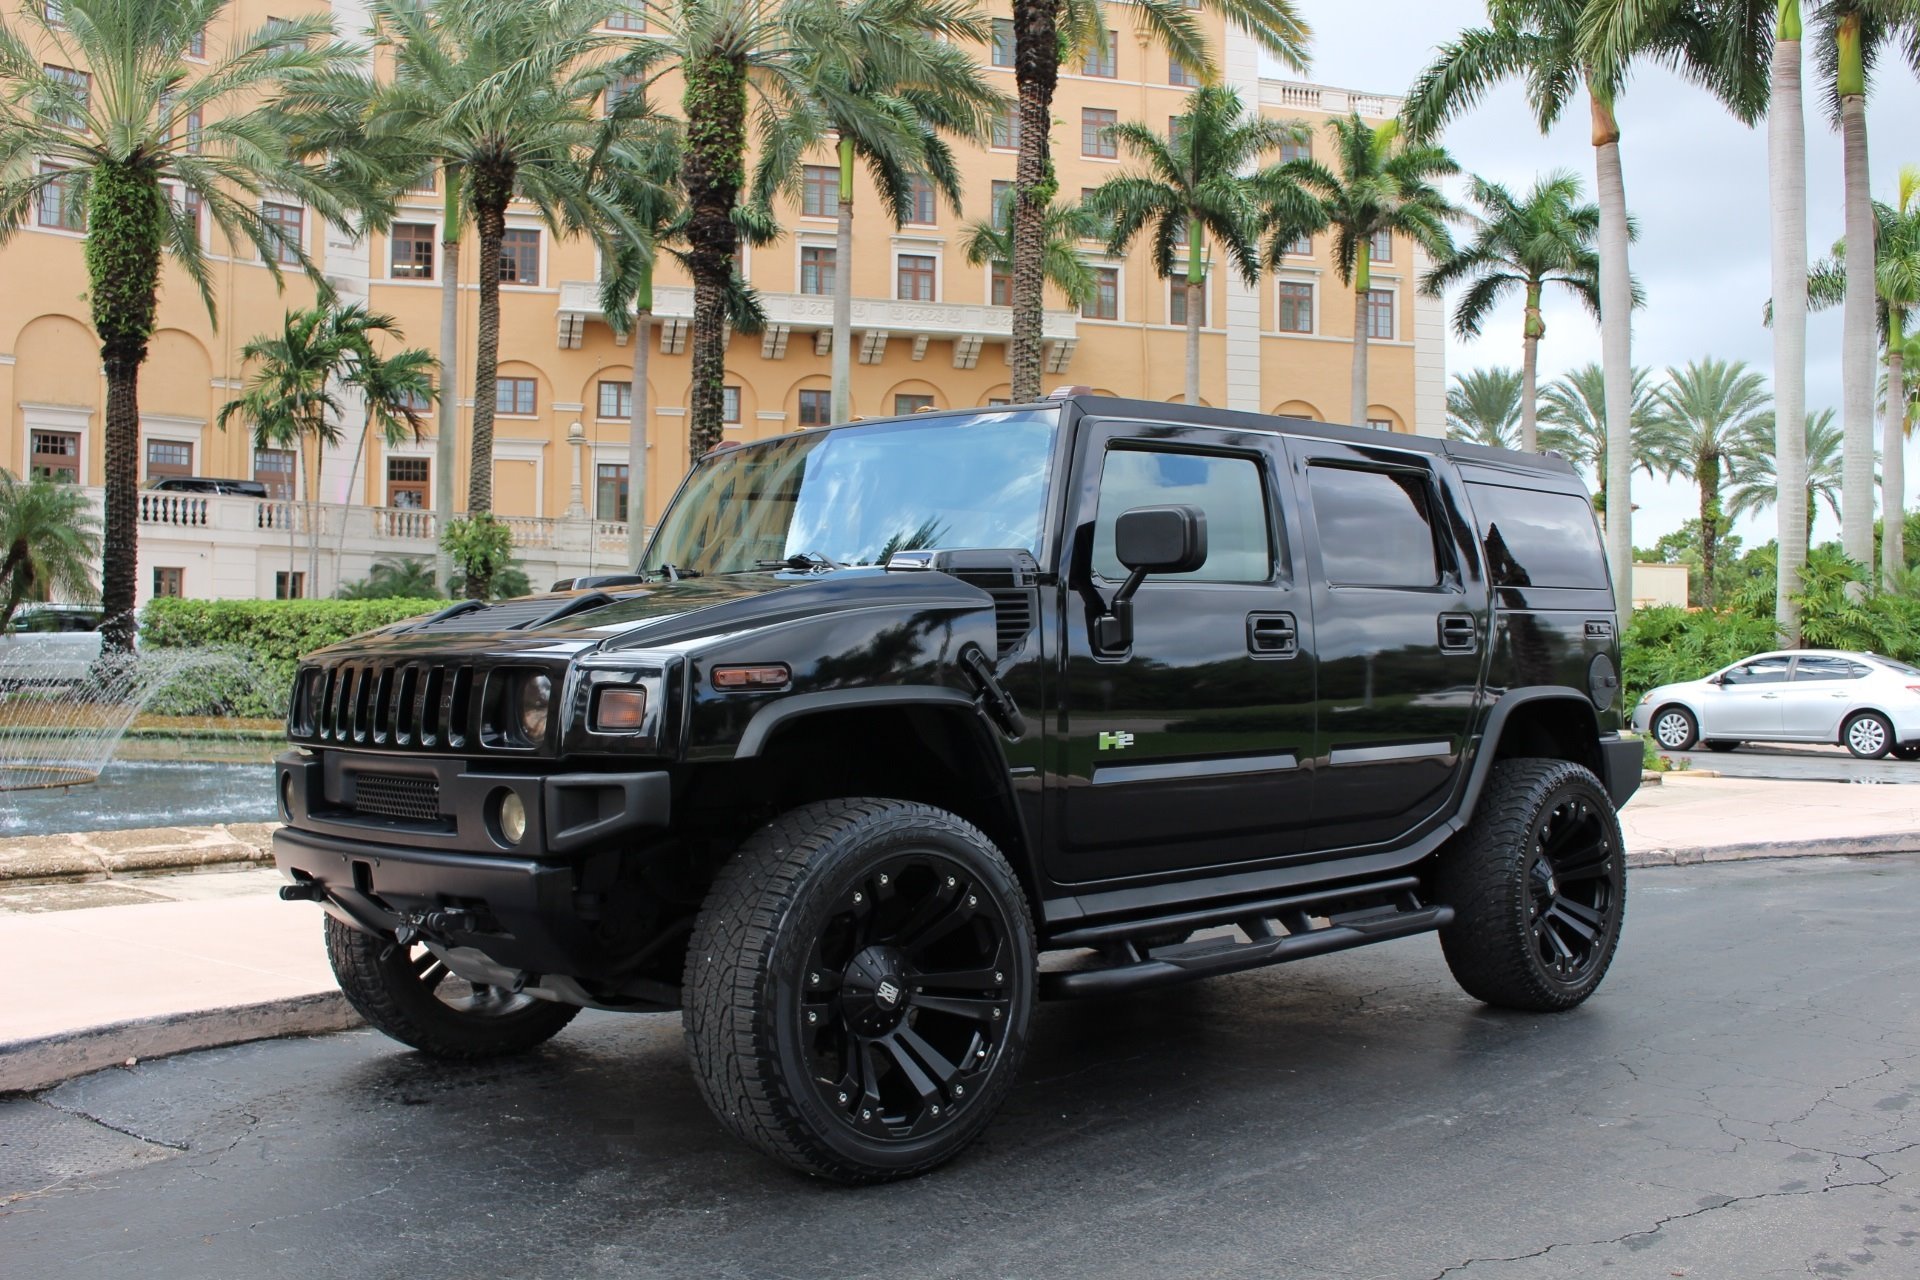 Used 2004 HUMMER H2 Lux Series for sale Sold at The Gables Sports Cars in Miami FL 33146 4